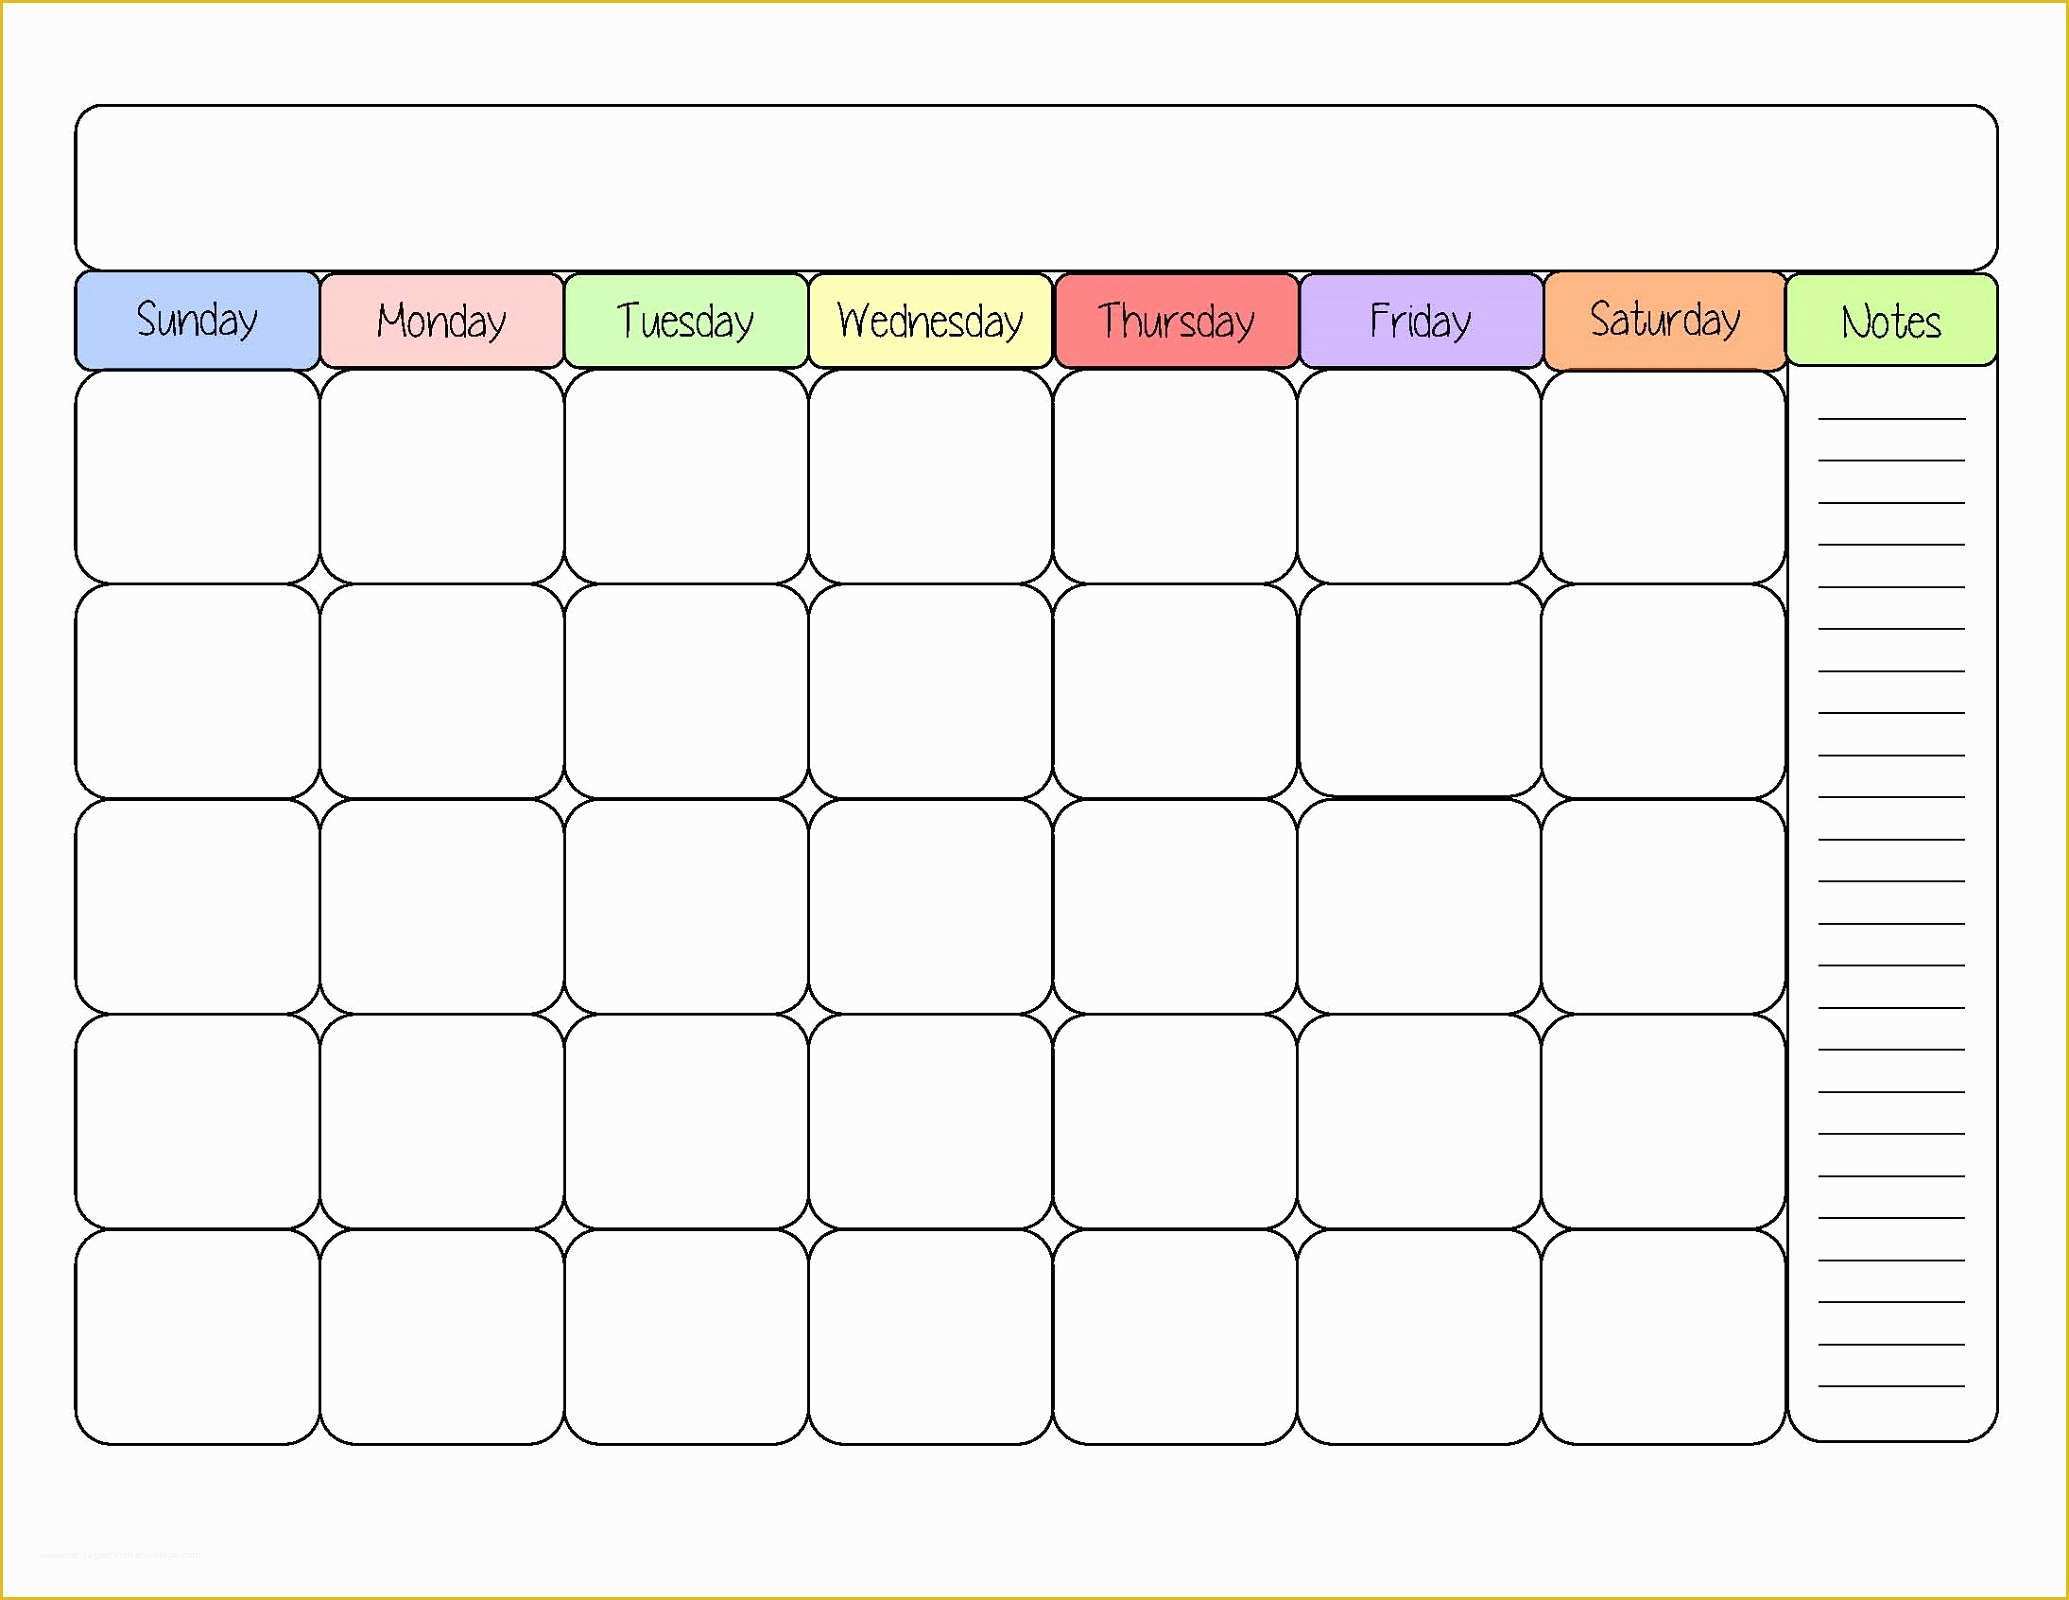 Free Downloadable Calendar Template Of Free Printable Calendar Templates